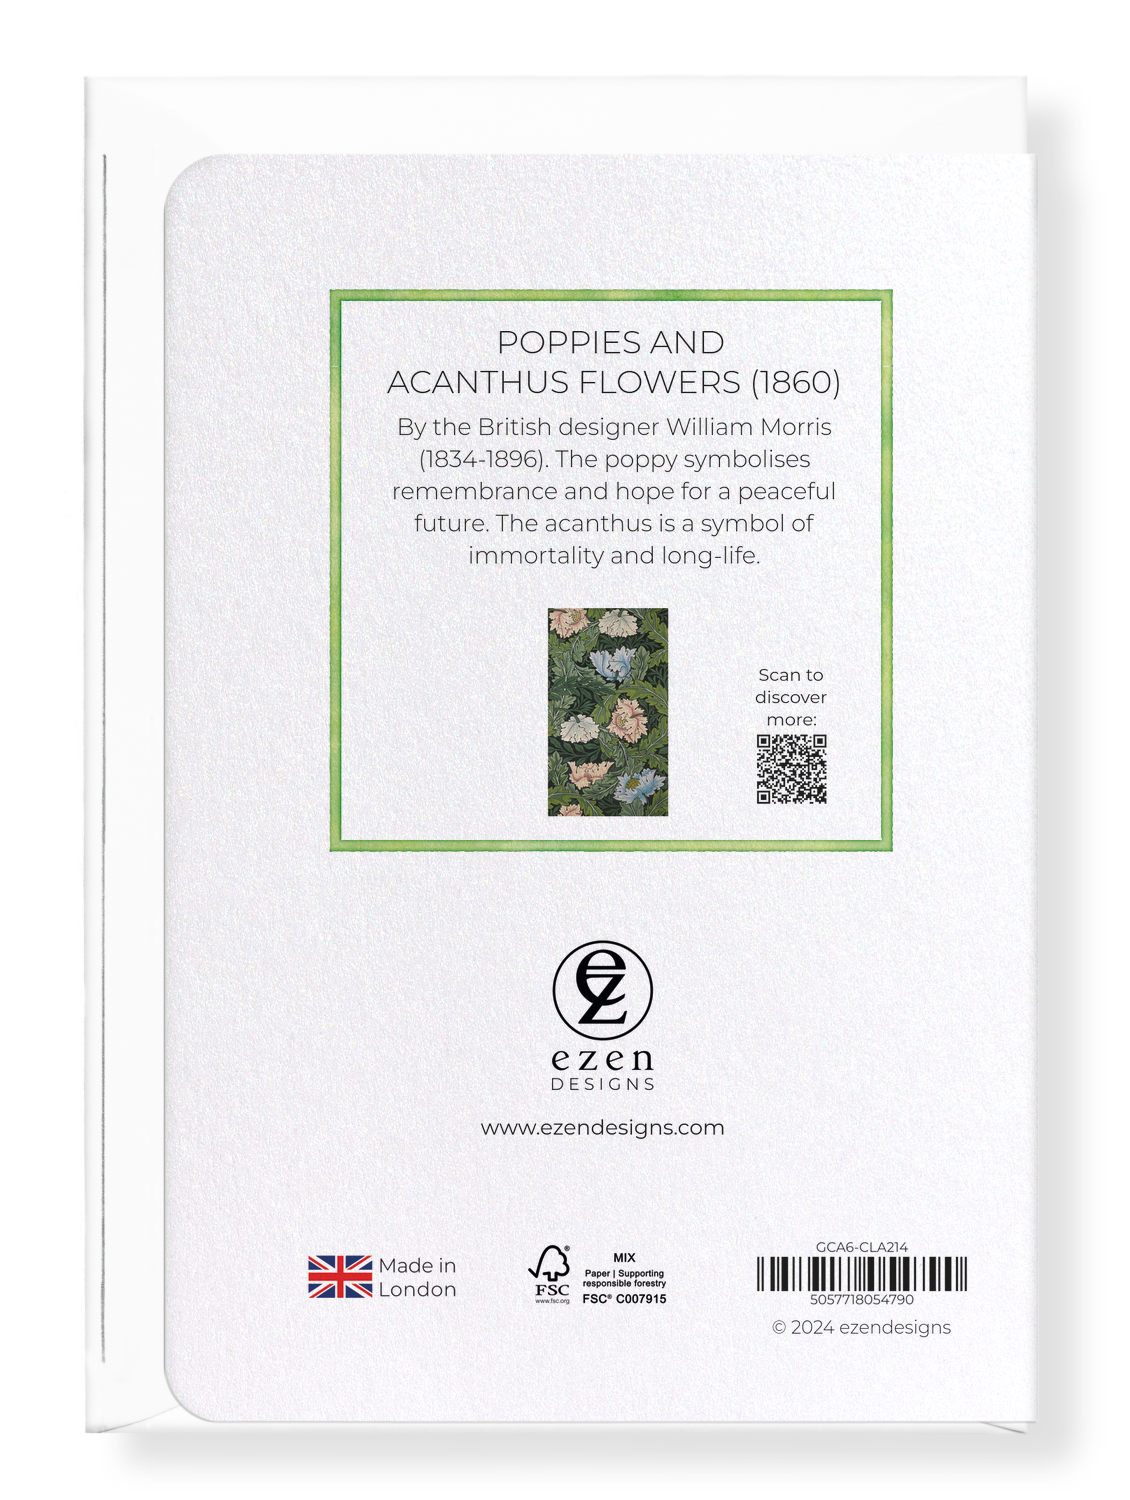 Ezen Designs - Poppies and acanthus flowers (1860) - Greeting Card - Back